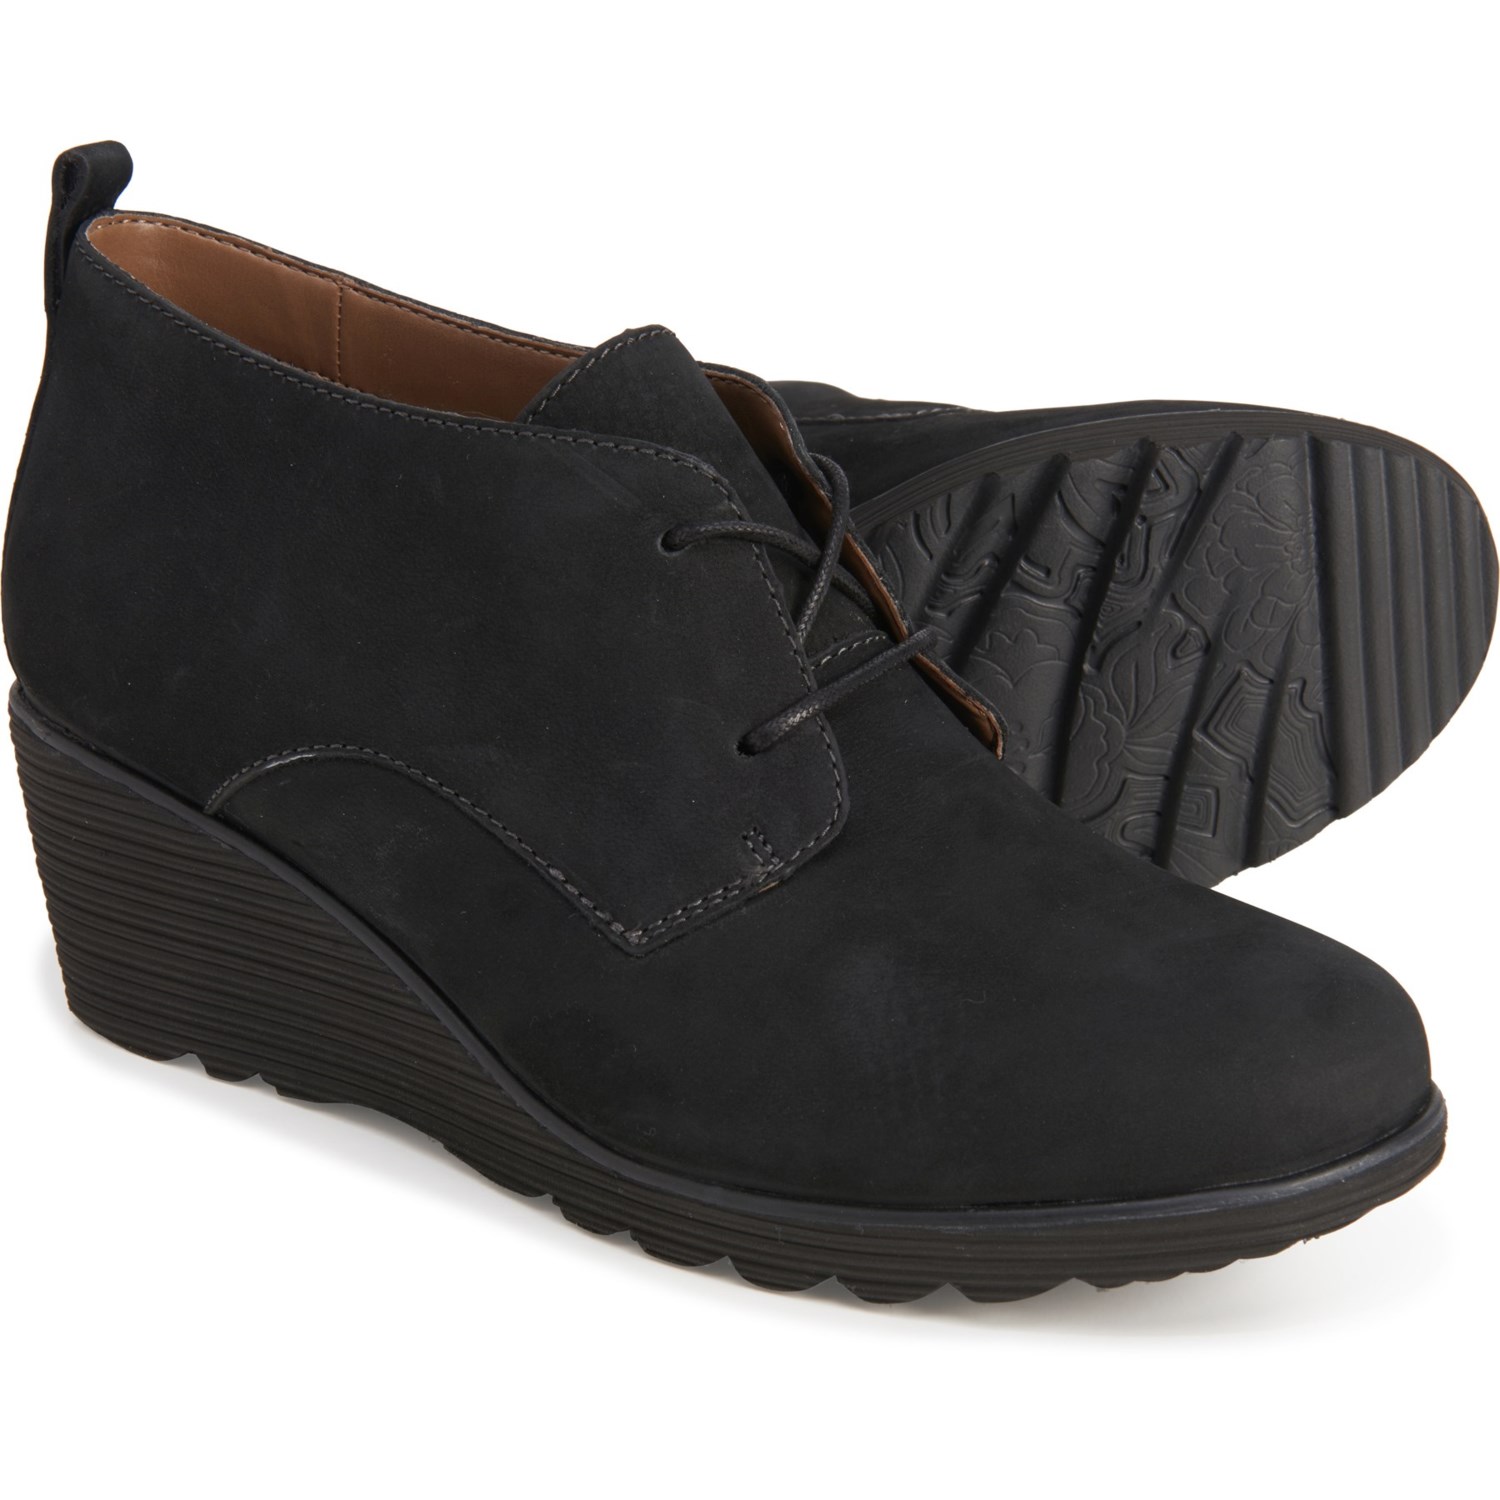 oxford wedge shoes